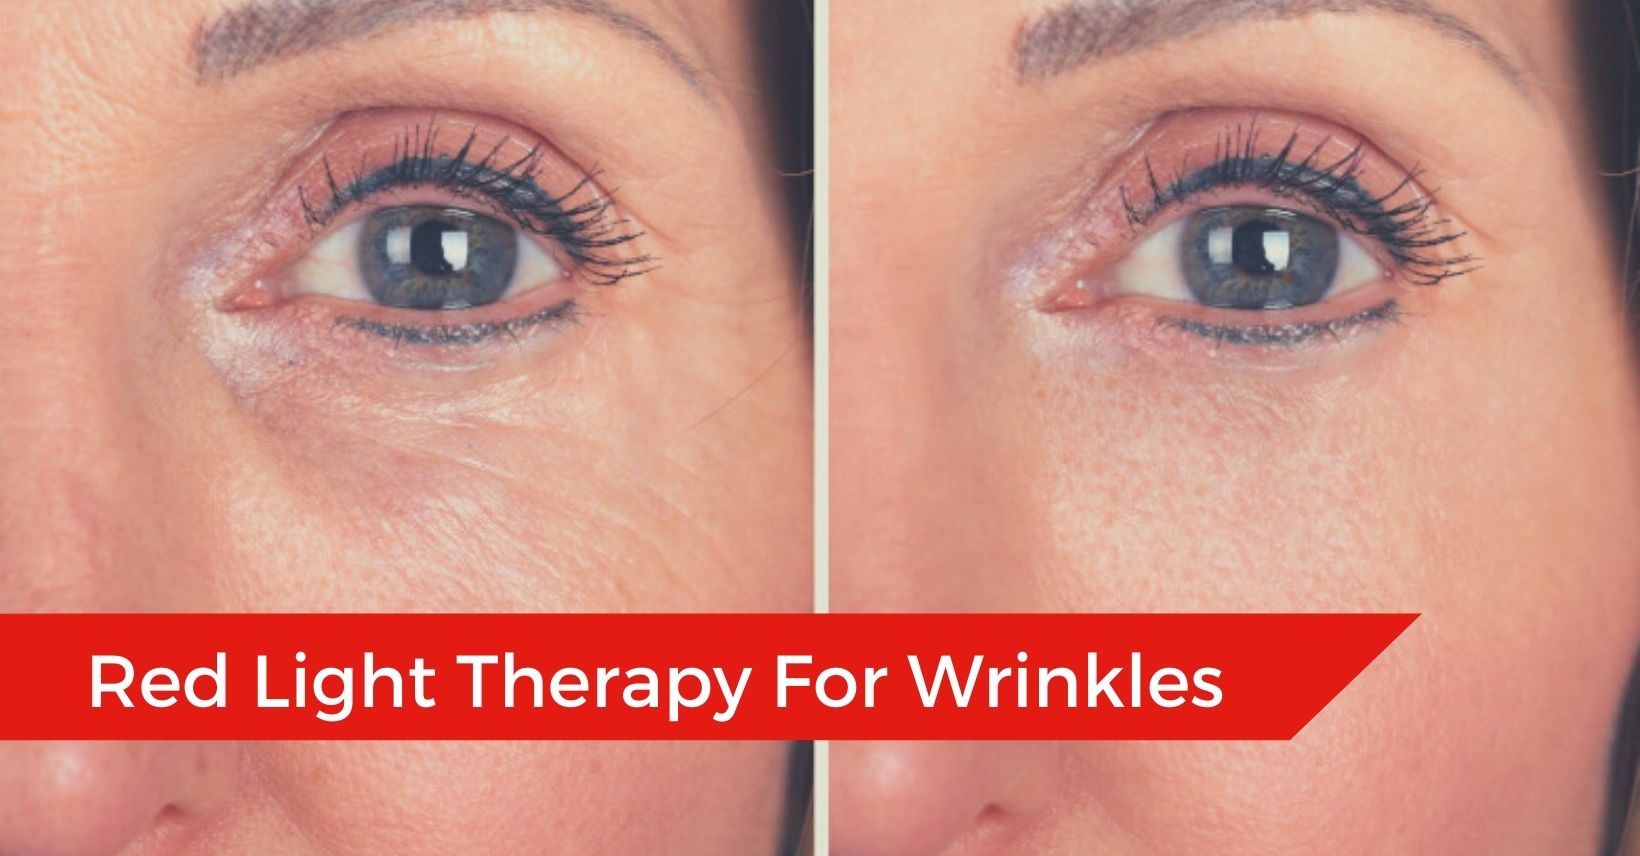 Red Light Therapy For Wrinkles The Best Way To Reverse Skin Aging